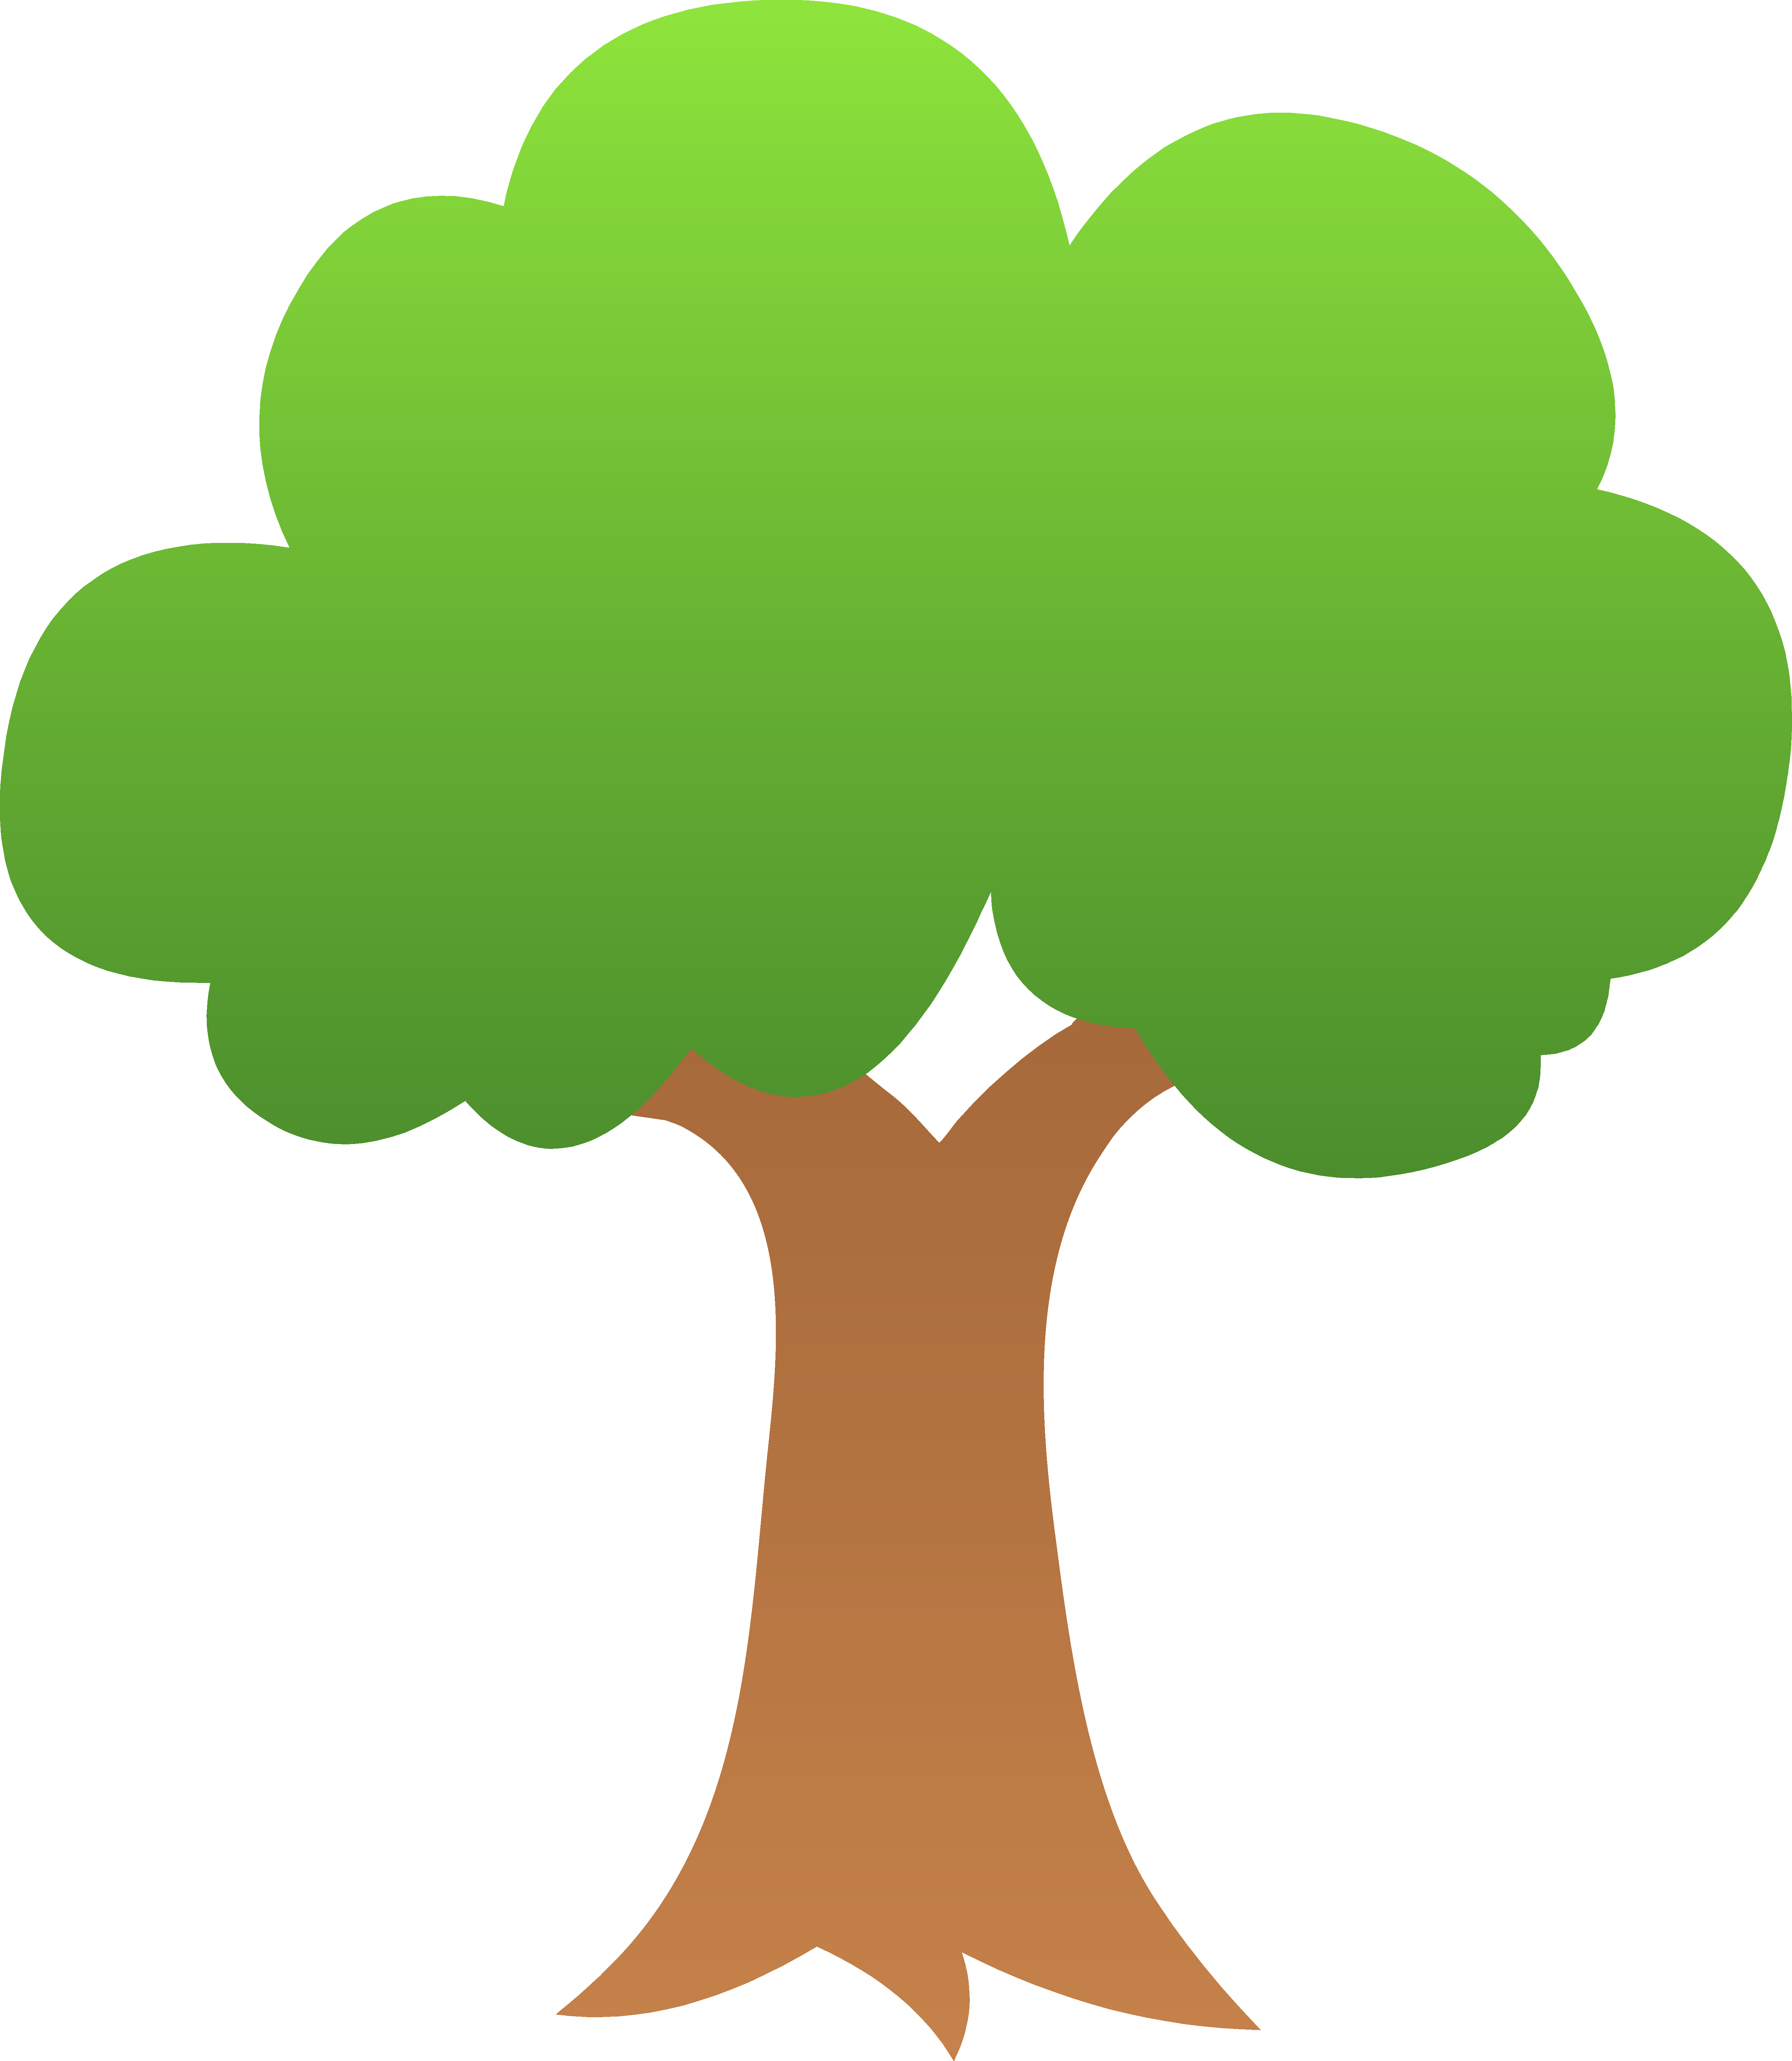 Trees tree clipart free clipart images - Clipartix